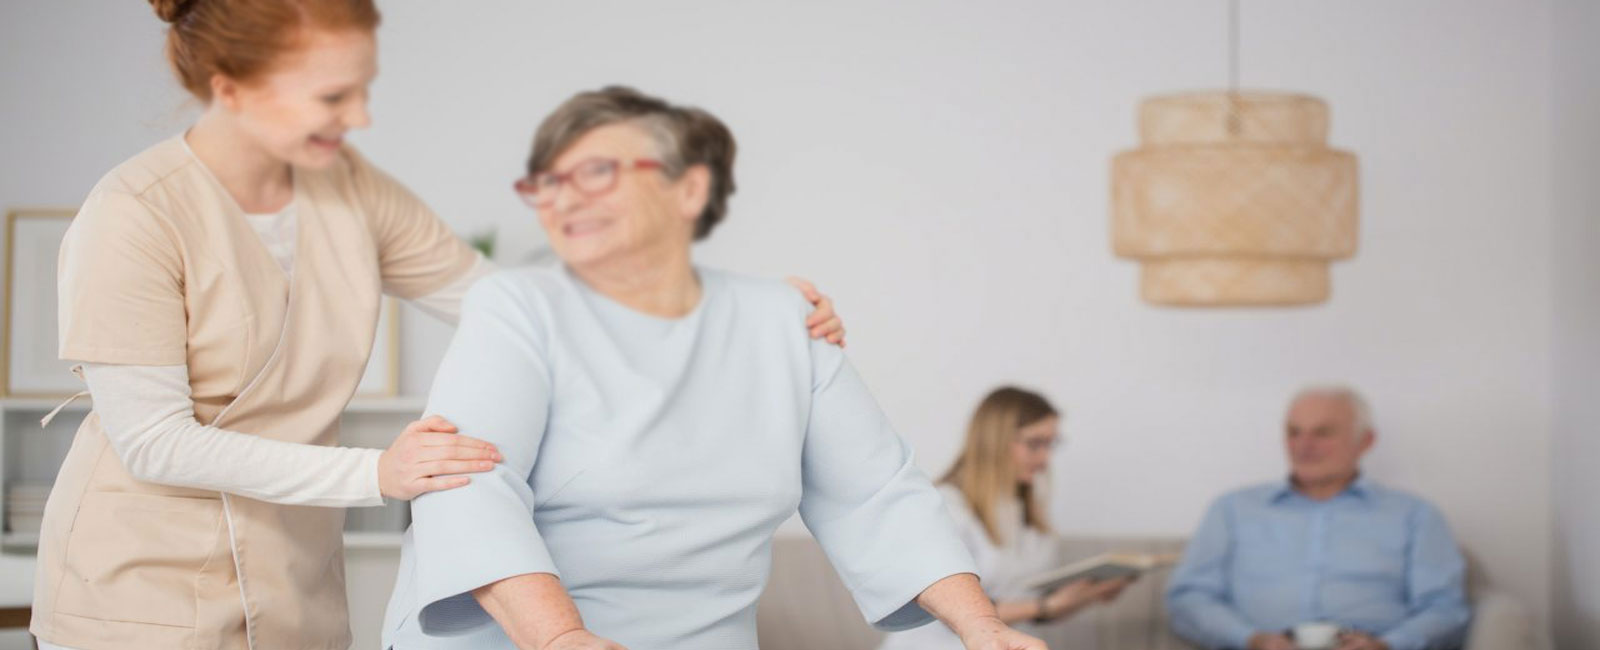 We Help Your Elderly Parents Live an Active and Fulfilled Life in Their Own Home.